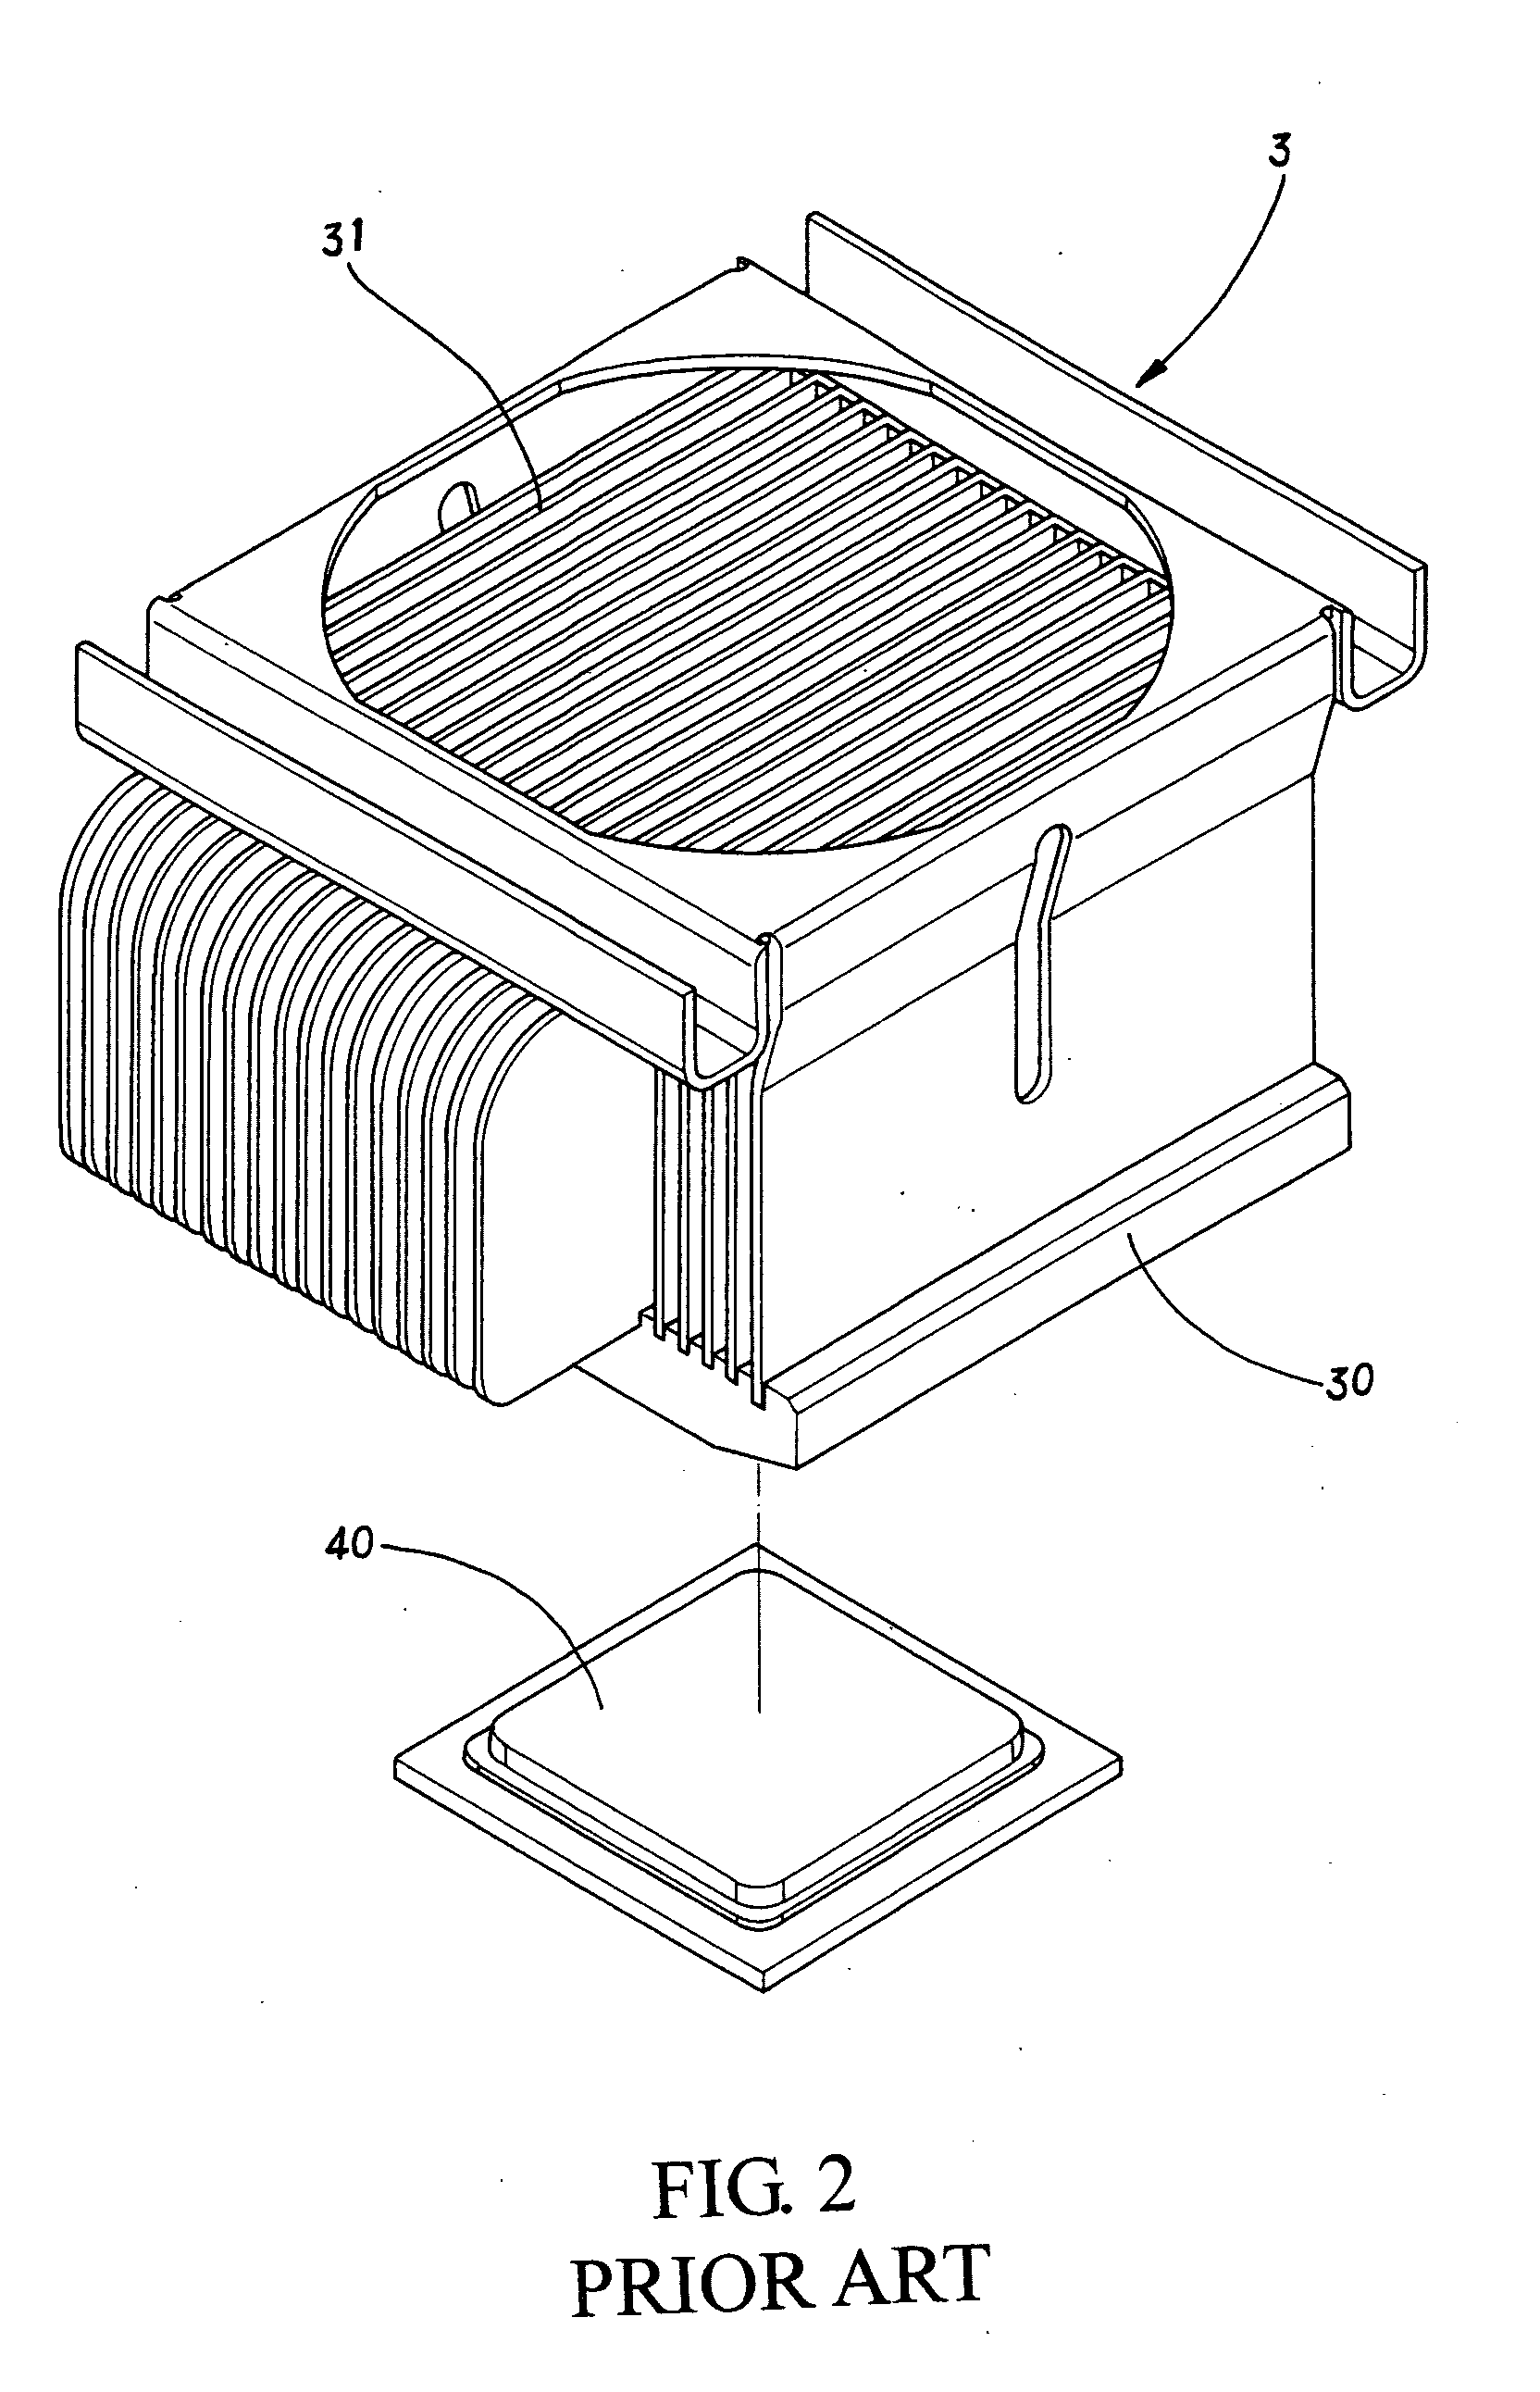 Heat dissipating device holder structure with a thin film thermal conducting medium coating